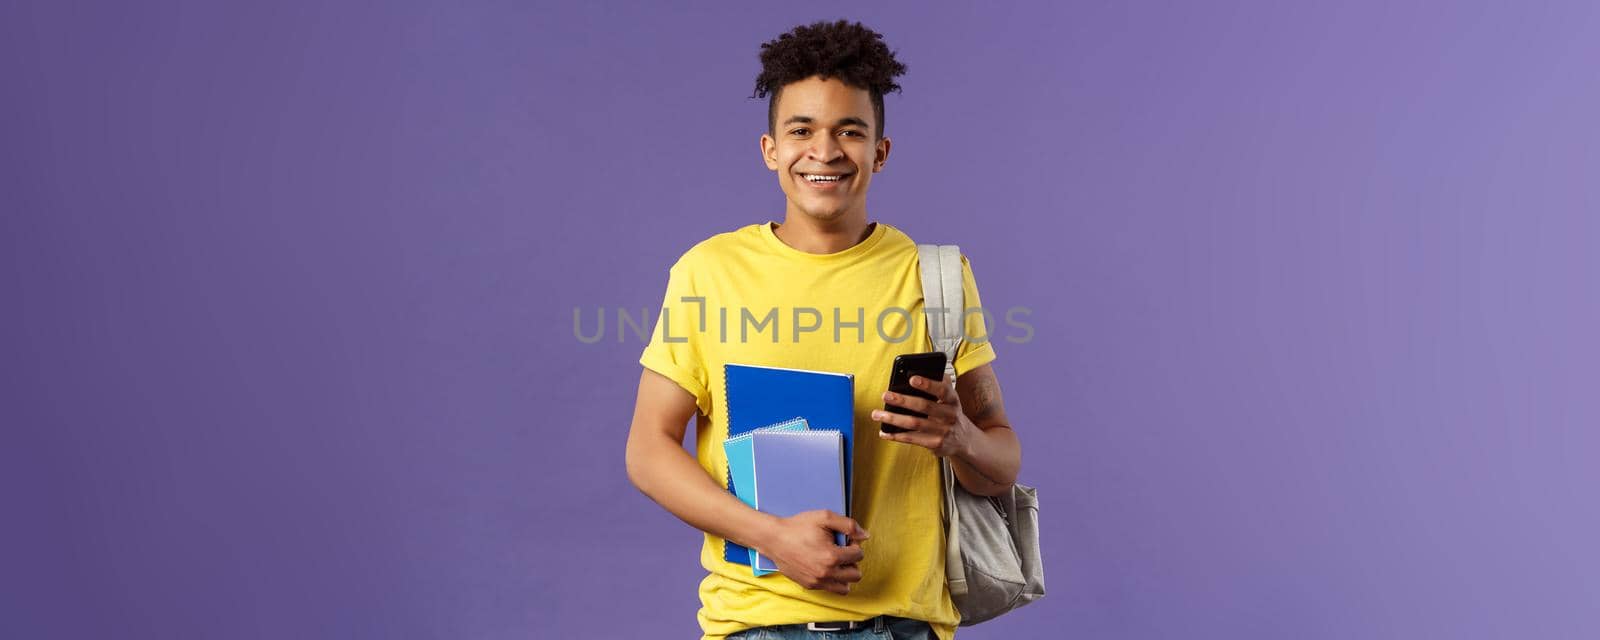 Back to school, university concept. Portrait of cheerful young handsome male student wearing backpack on shoulder, hold notebooks and studying books, texting friend mobile phone.